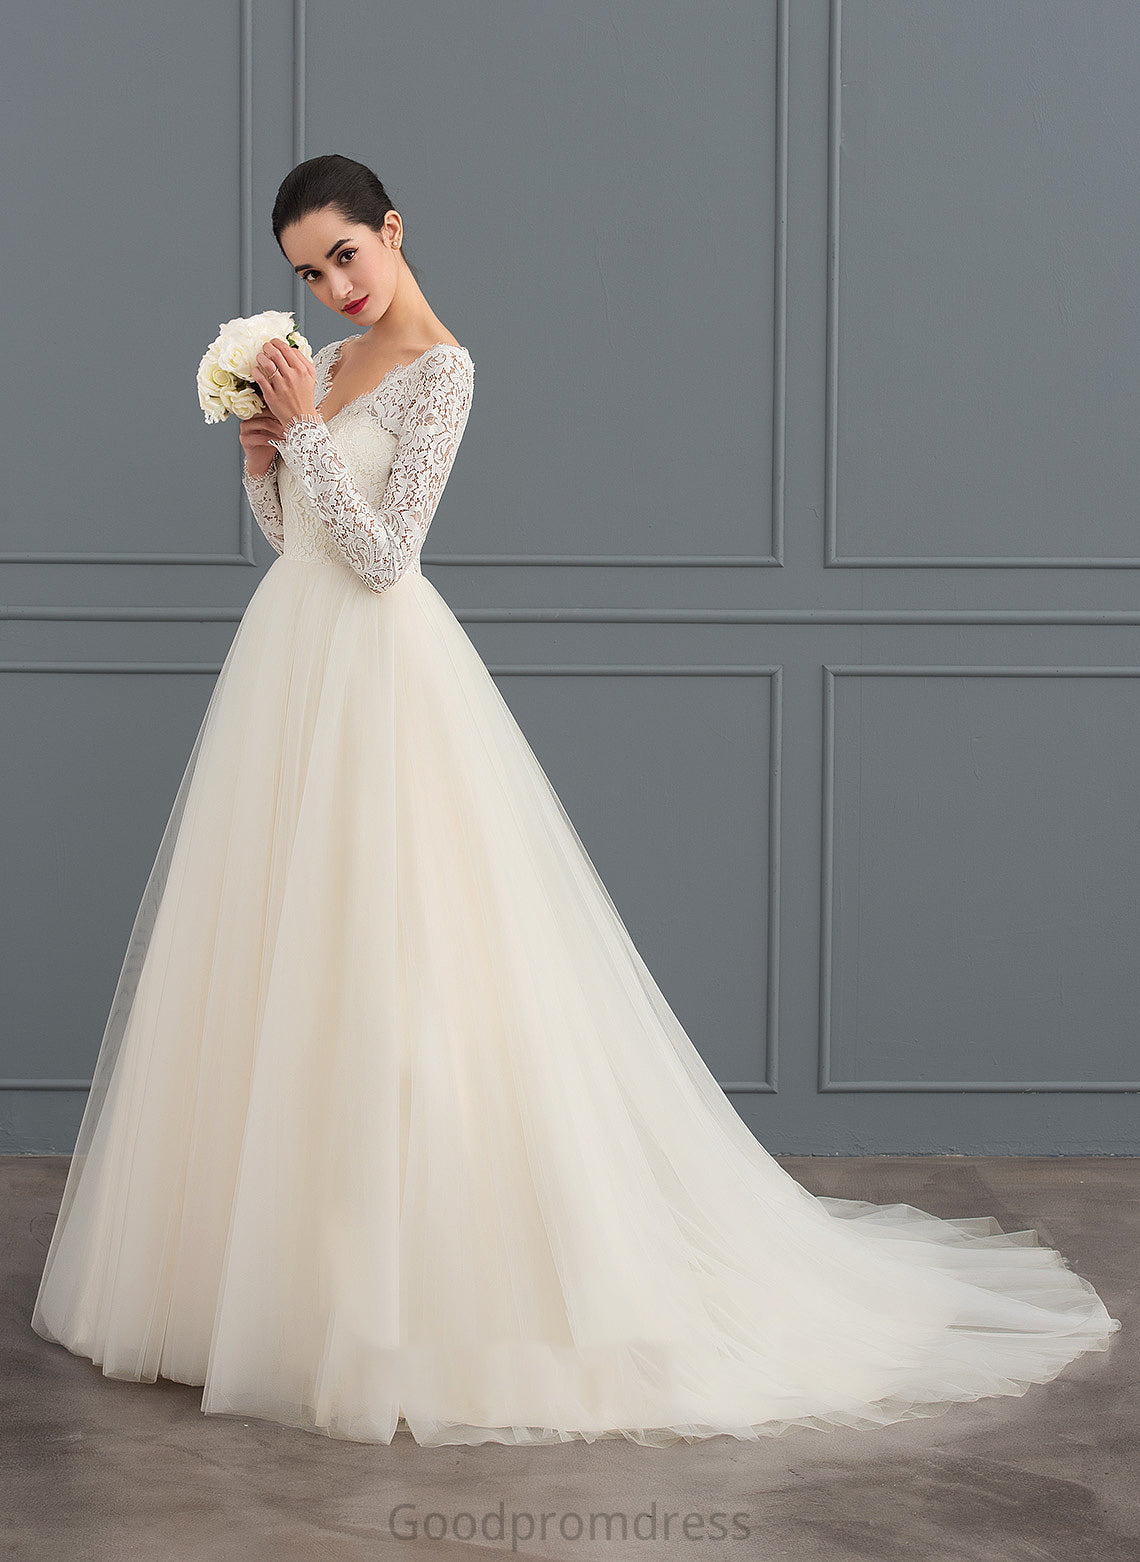 Lace Dress Wedding Dresses Wedding Ball-Gown/Princess Court Tulle Train V-neck Cailyn